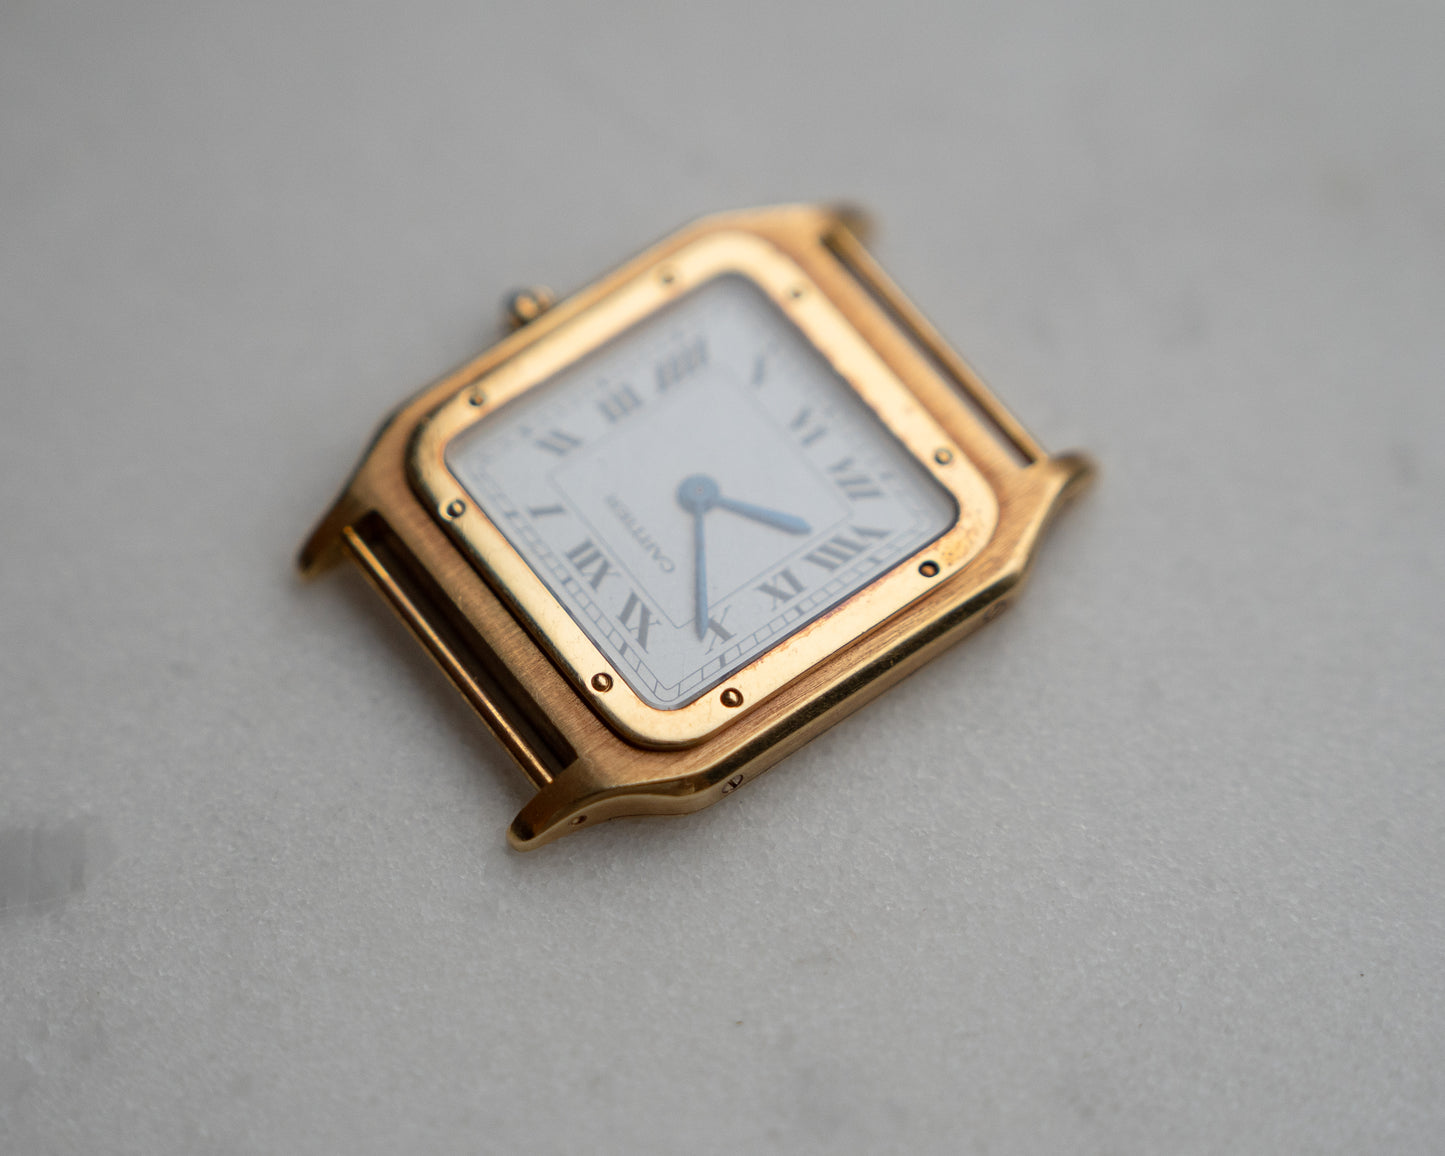 Cartier Santos-Dumont "Extra Flat" Large in 18k Yellow Gold, box & papers